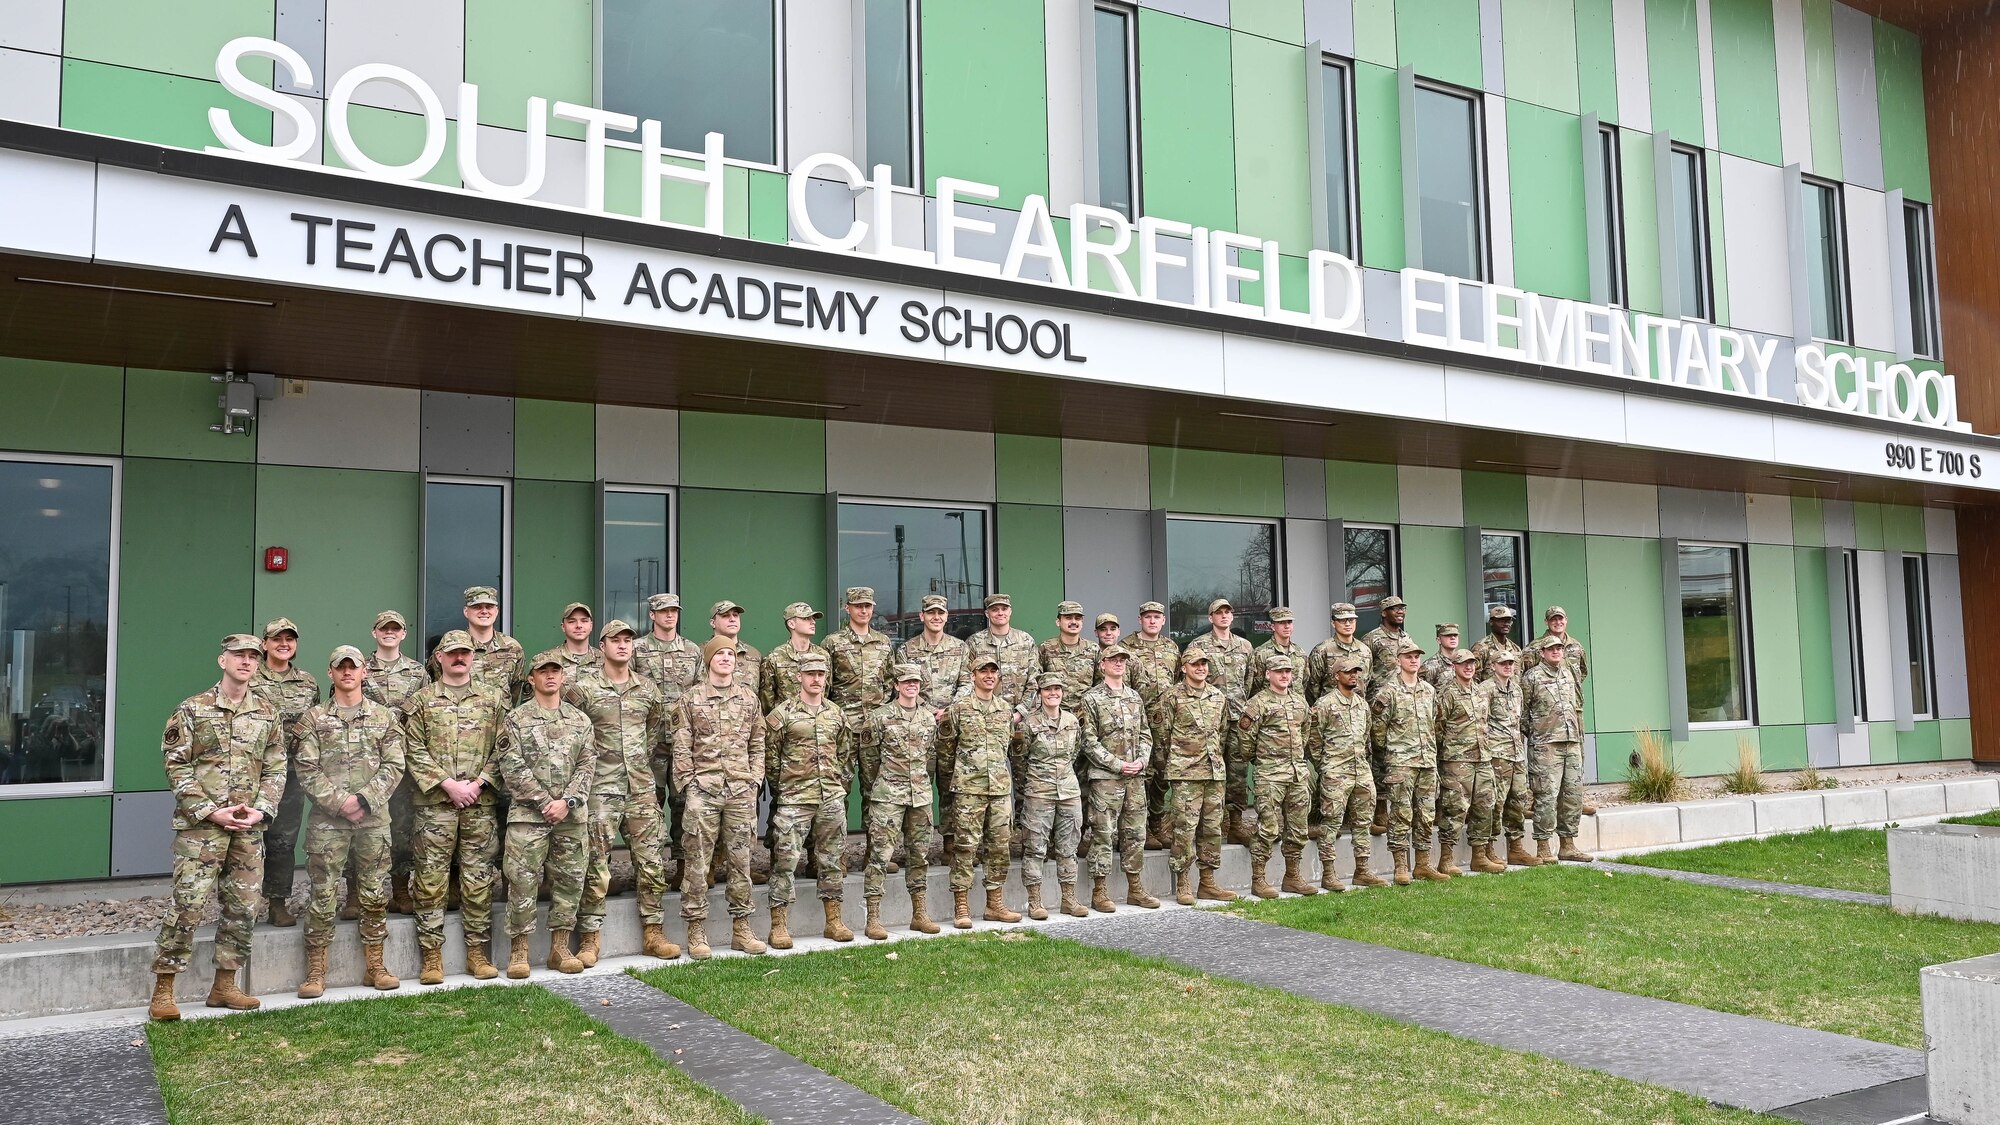 Airmen from Hill Air Force Base’s Airmen Leadership School pose in front of South Clearfield Elementary School April 18, 2023, in Clearfield, Utah. The Airmen visited the school to engage with the community during the Month of the Military Child. (U.S. Air Force photo by Cynthia Griggs)